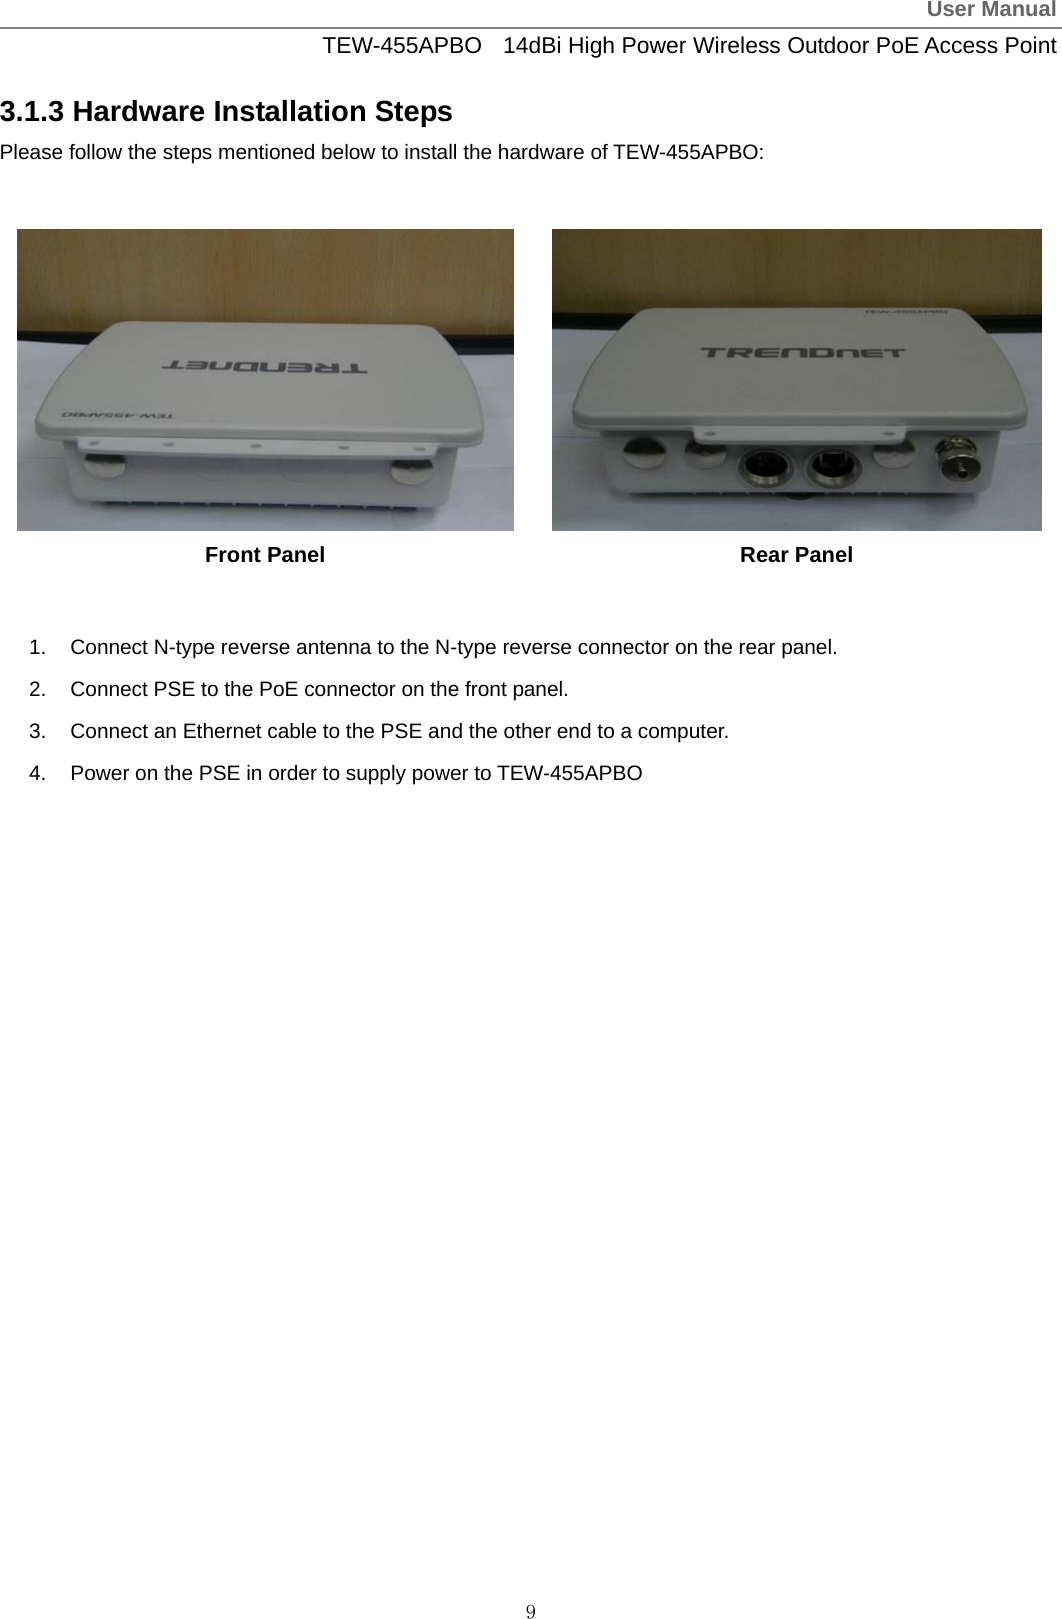 User ManualTEW-455APBO  14dBi High Power Wireless Outdoor PoE Access Point 9 3.1.3 Hardware Installation Steps Please follow the steps mentioned below to install the hardware of TEW-455APBO:   Front Panel  Rear Panel  1.  Connect N-type reverse antenna to the N-type reverse connector on the rear panel. 2.  Connect PSE to the PoE connector on the front panel. 3.  Connect an Ethernet cable to the PSE and the other end to a computer. 4.  Power on the PSE in order to supply power to TEW-455APBO  